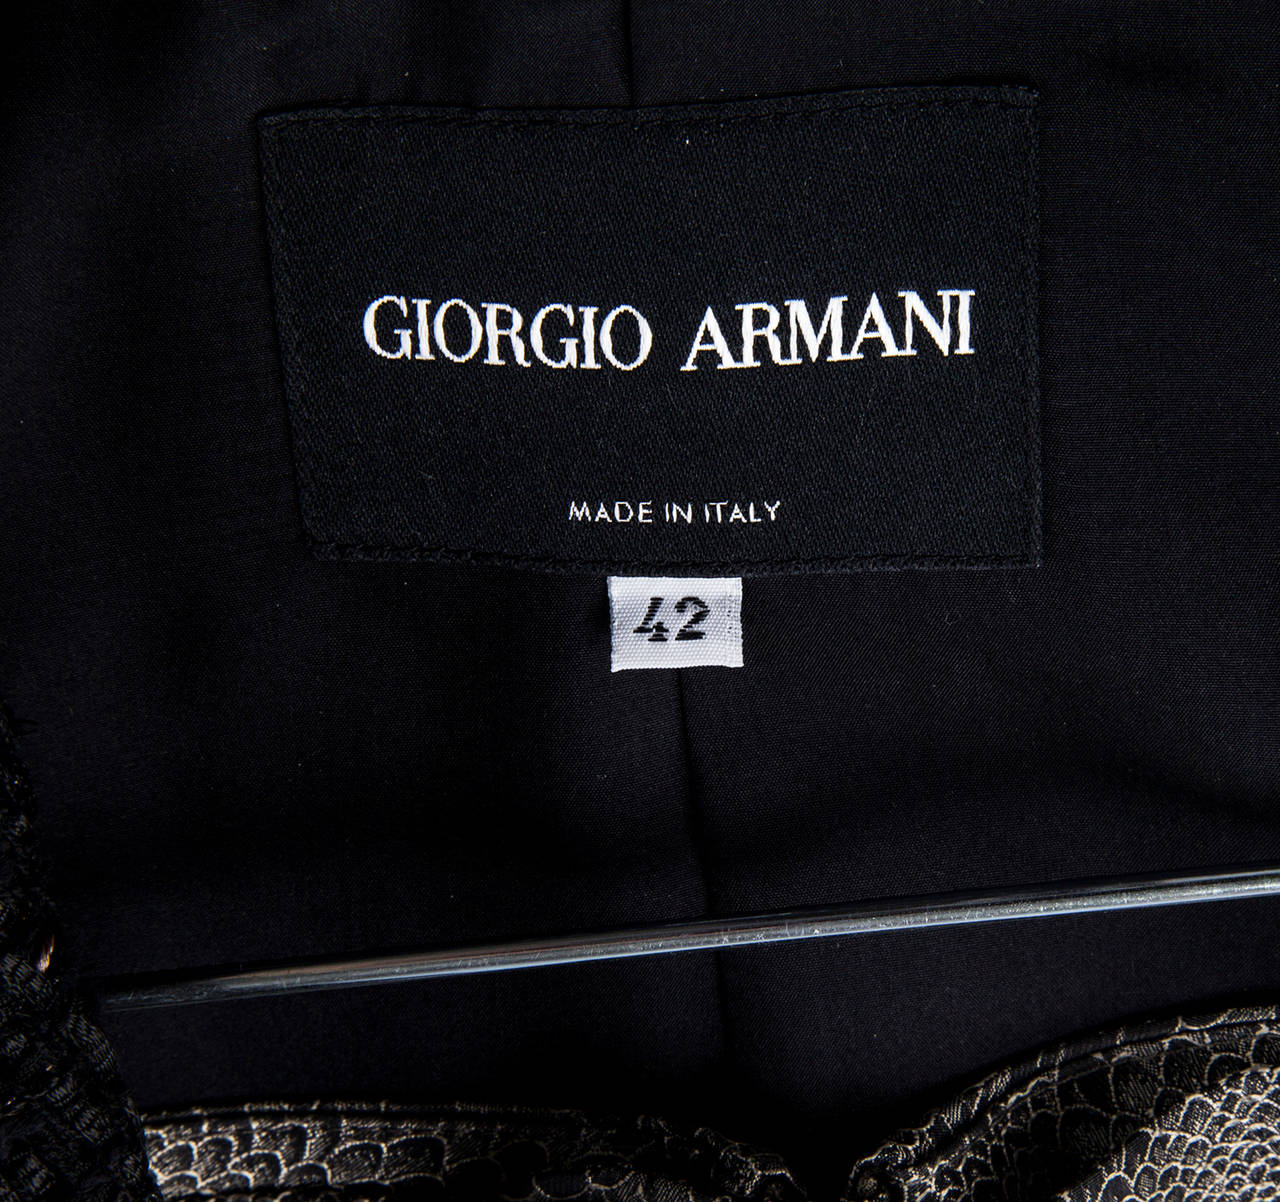 Giorgio Armani Jacket and Skirt Suit In Excellent Condition For Sale In Montreal, QC